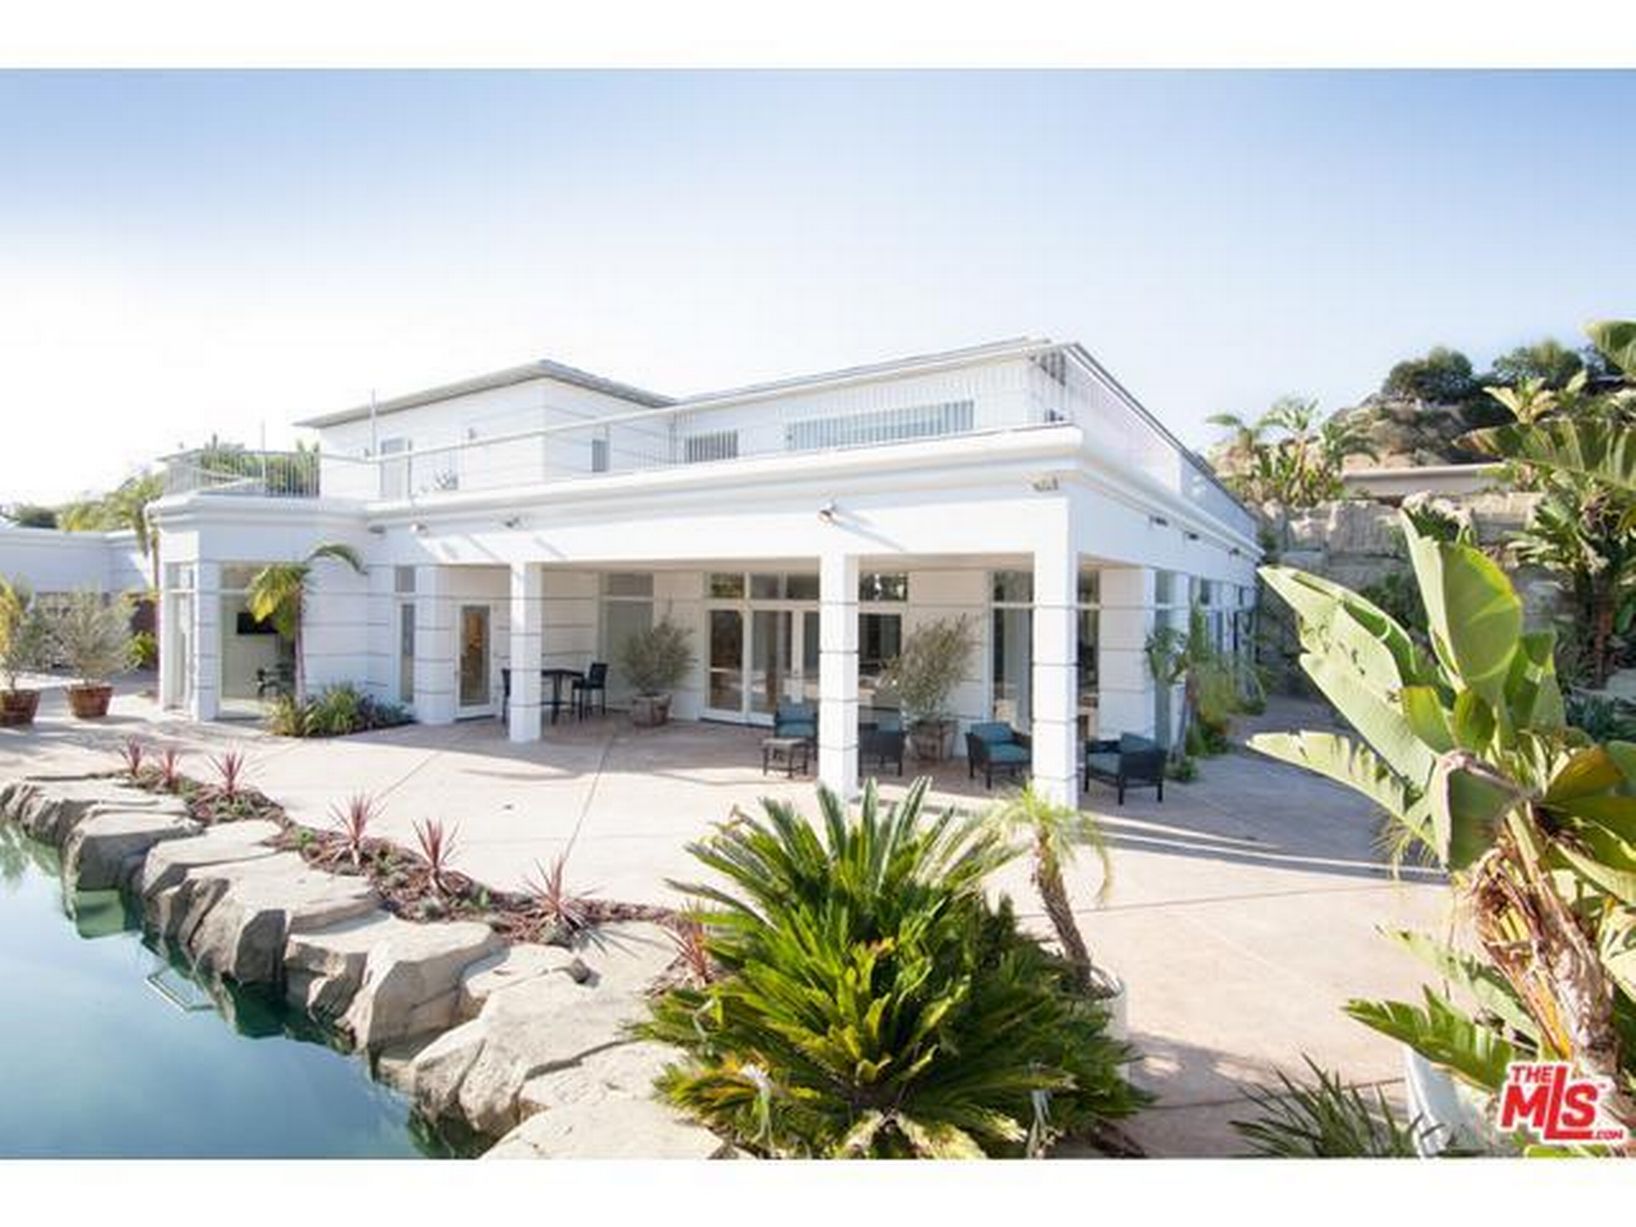 Steven Gerrard's £18m Los Angeles mansion is just yards from where Elvis Presley once lived